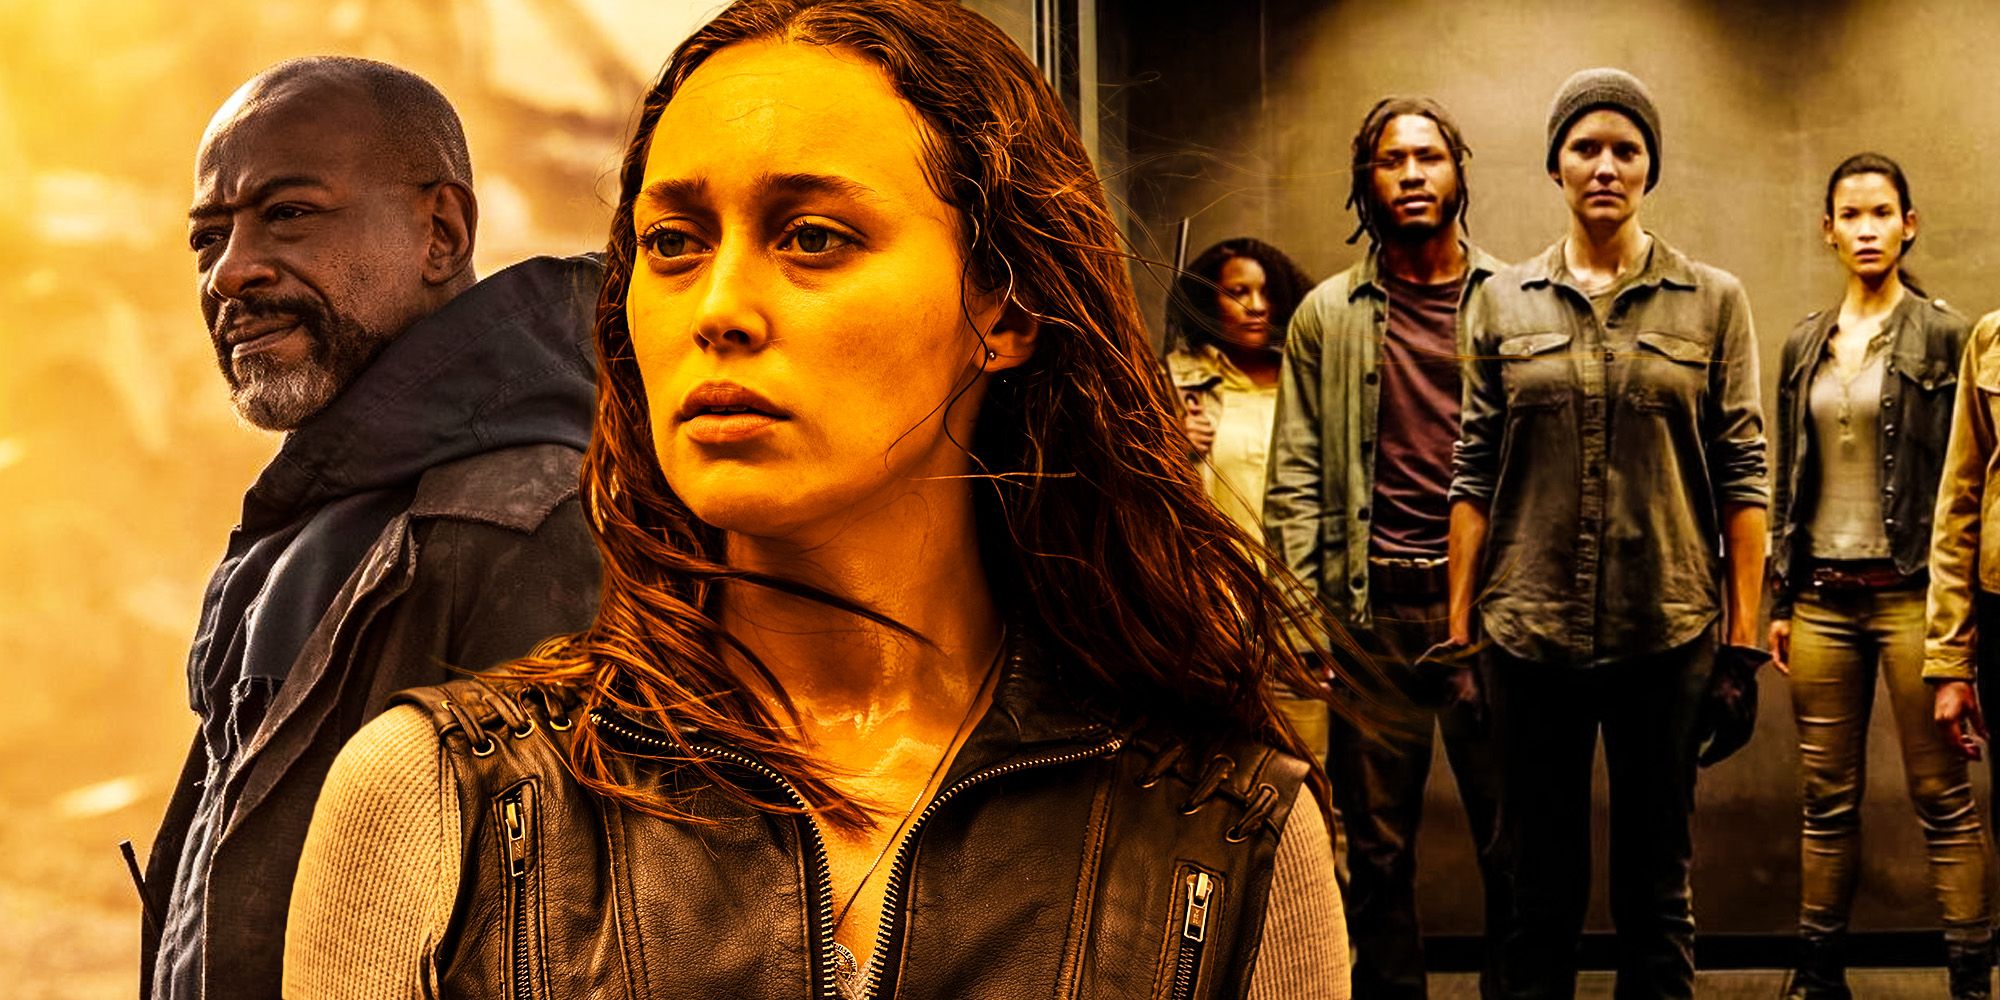 Fear the walking morgan alicia Delivers On Its Season 4 Promise